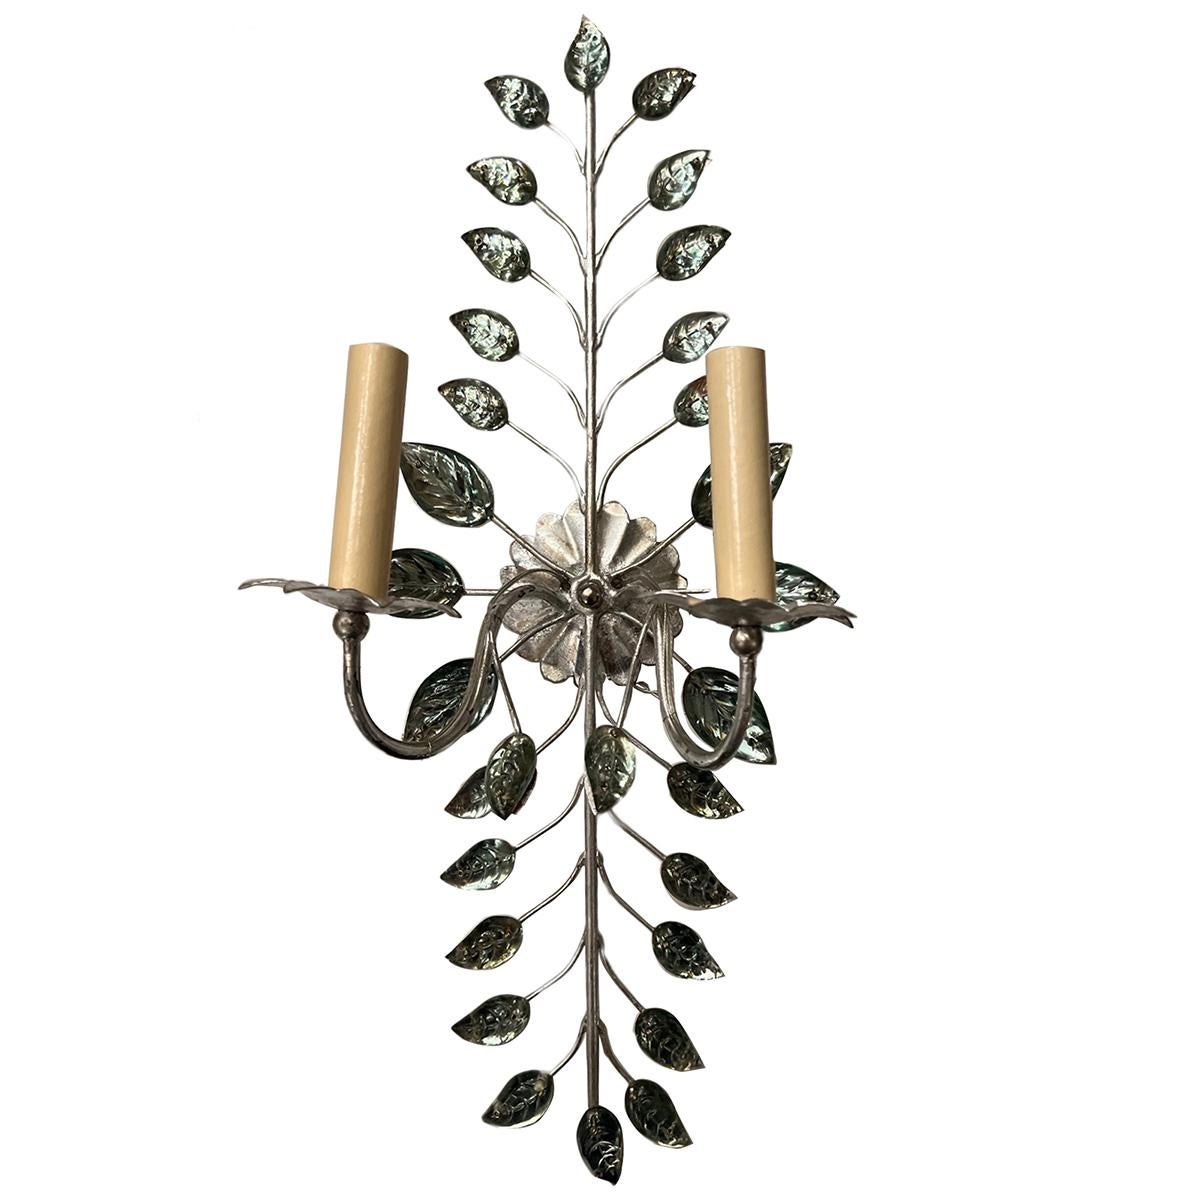 Set of four French circa 1940’s silver-leaf two-arm sconces with molded glass leaves. Sold per pair.

Measurements:
Height 22.5?
Width: 9.5?
Depth: 6.25?